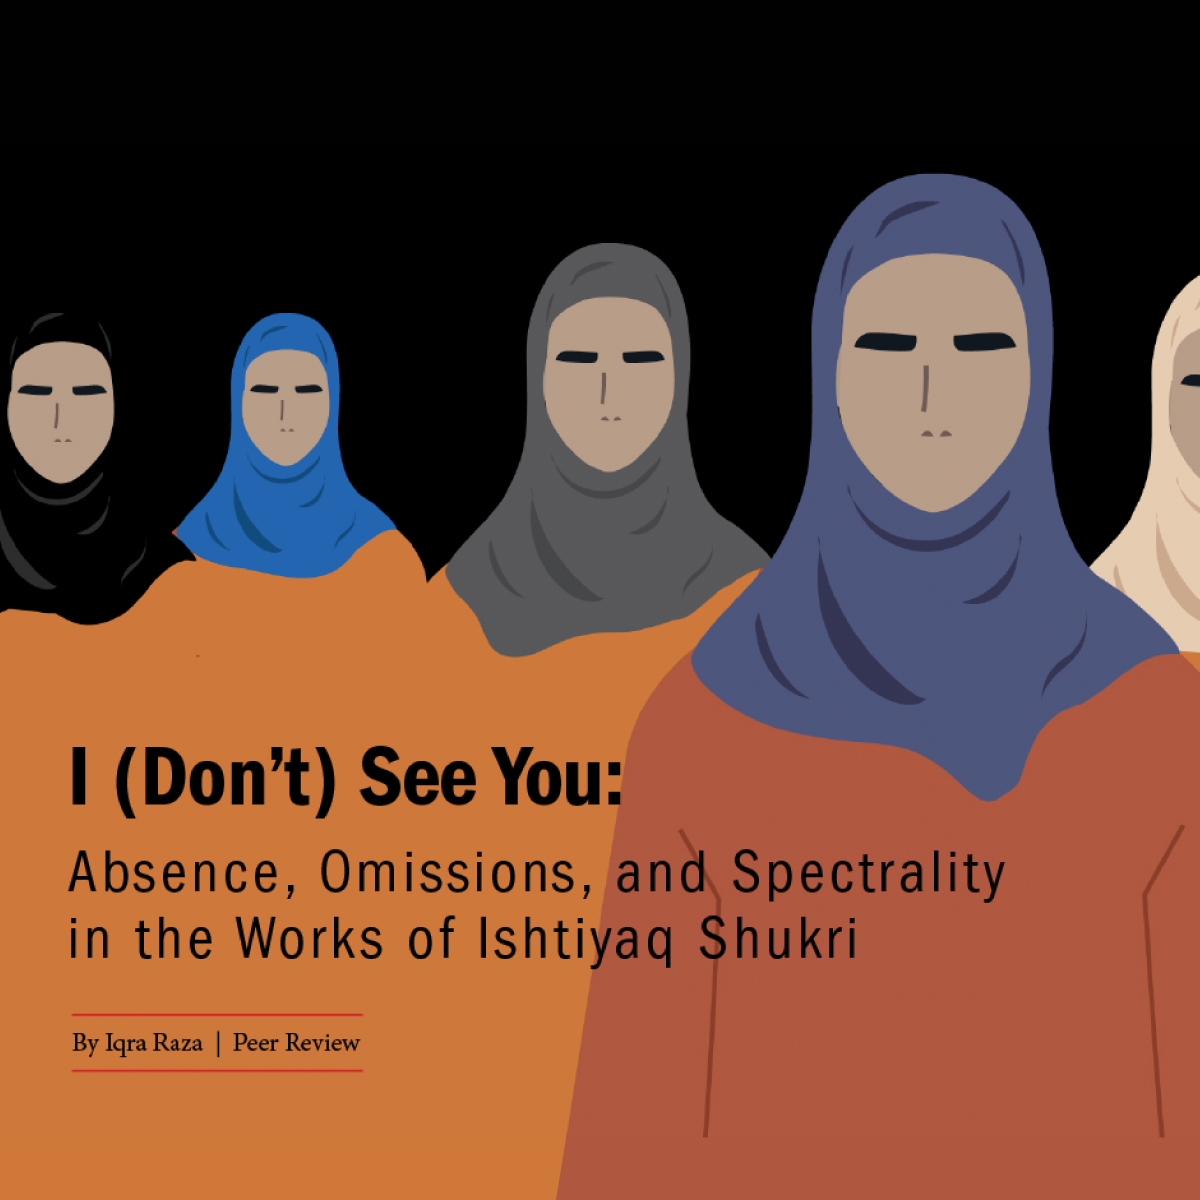 I (Don’t) See You: Absence, Omissions, and Spectrality in the Works of Ishtiyaq Shukri